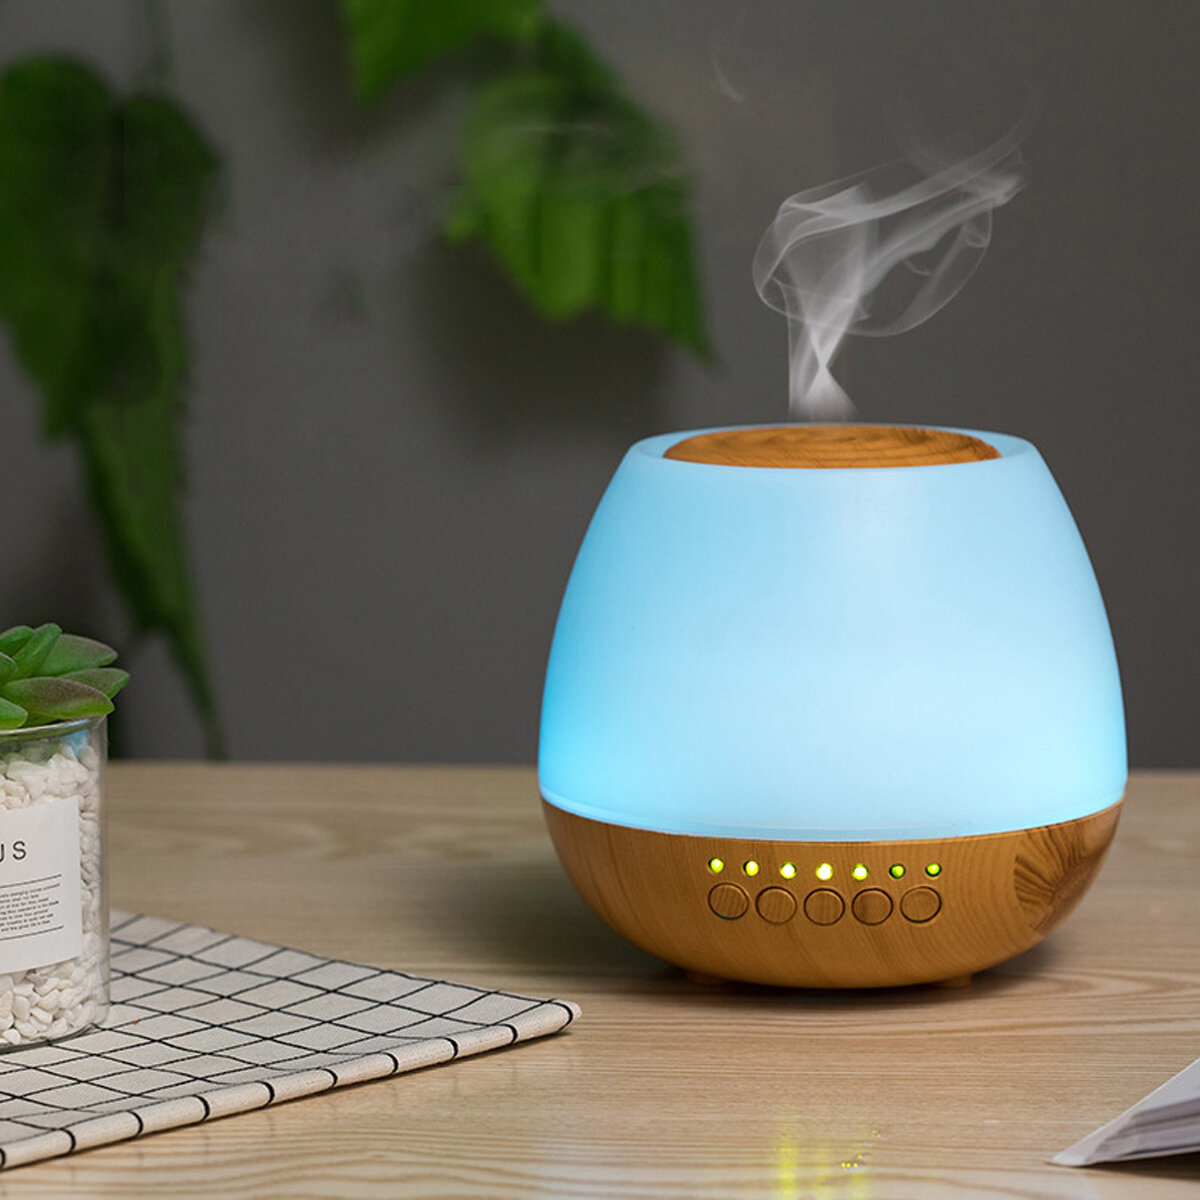 400ml Electric Ultrasonic Air Mist Humidifier Purifier Aroma Diffuser Bluetooth Function with Colorful lights for Home C